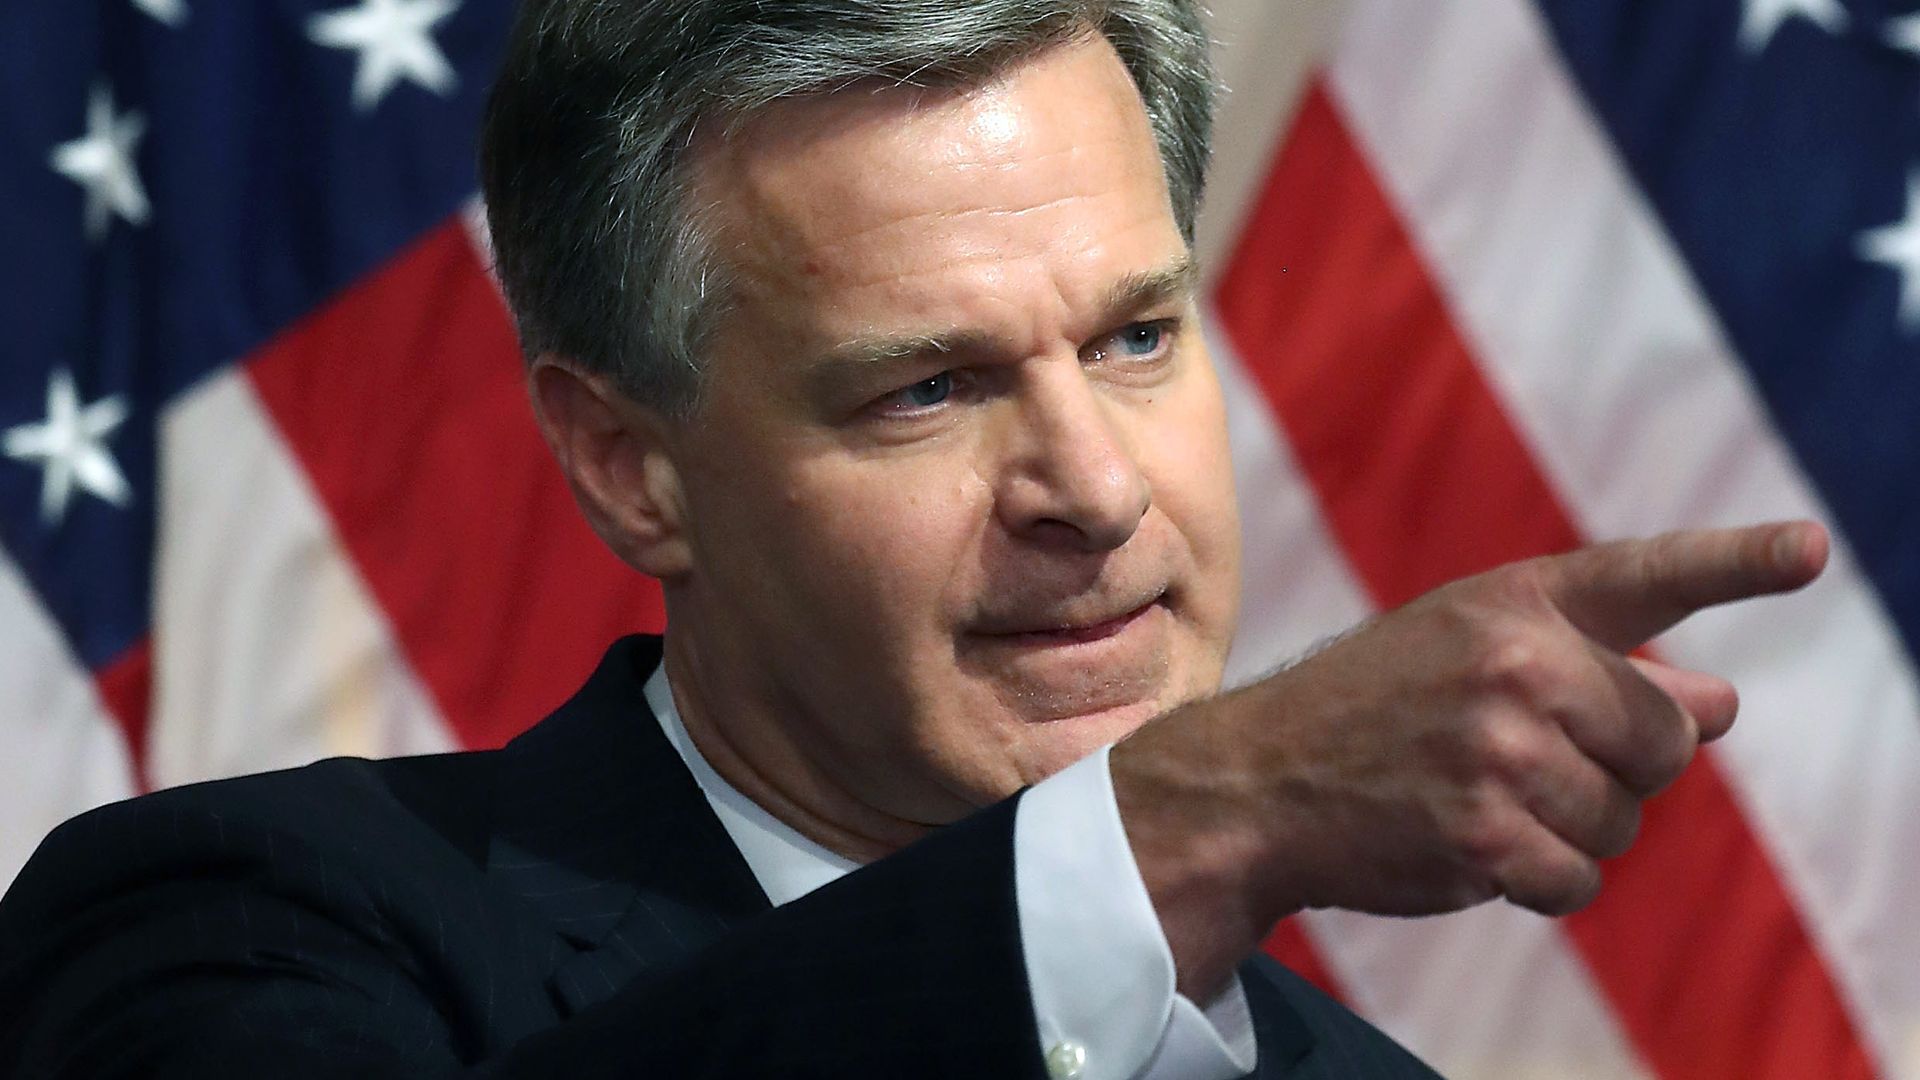 FBI Director Wray's refusal to comply with a subpoena is an example of the lack of accountability within the U.S. law enforcement system.